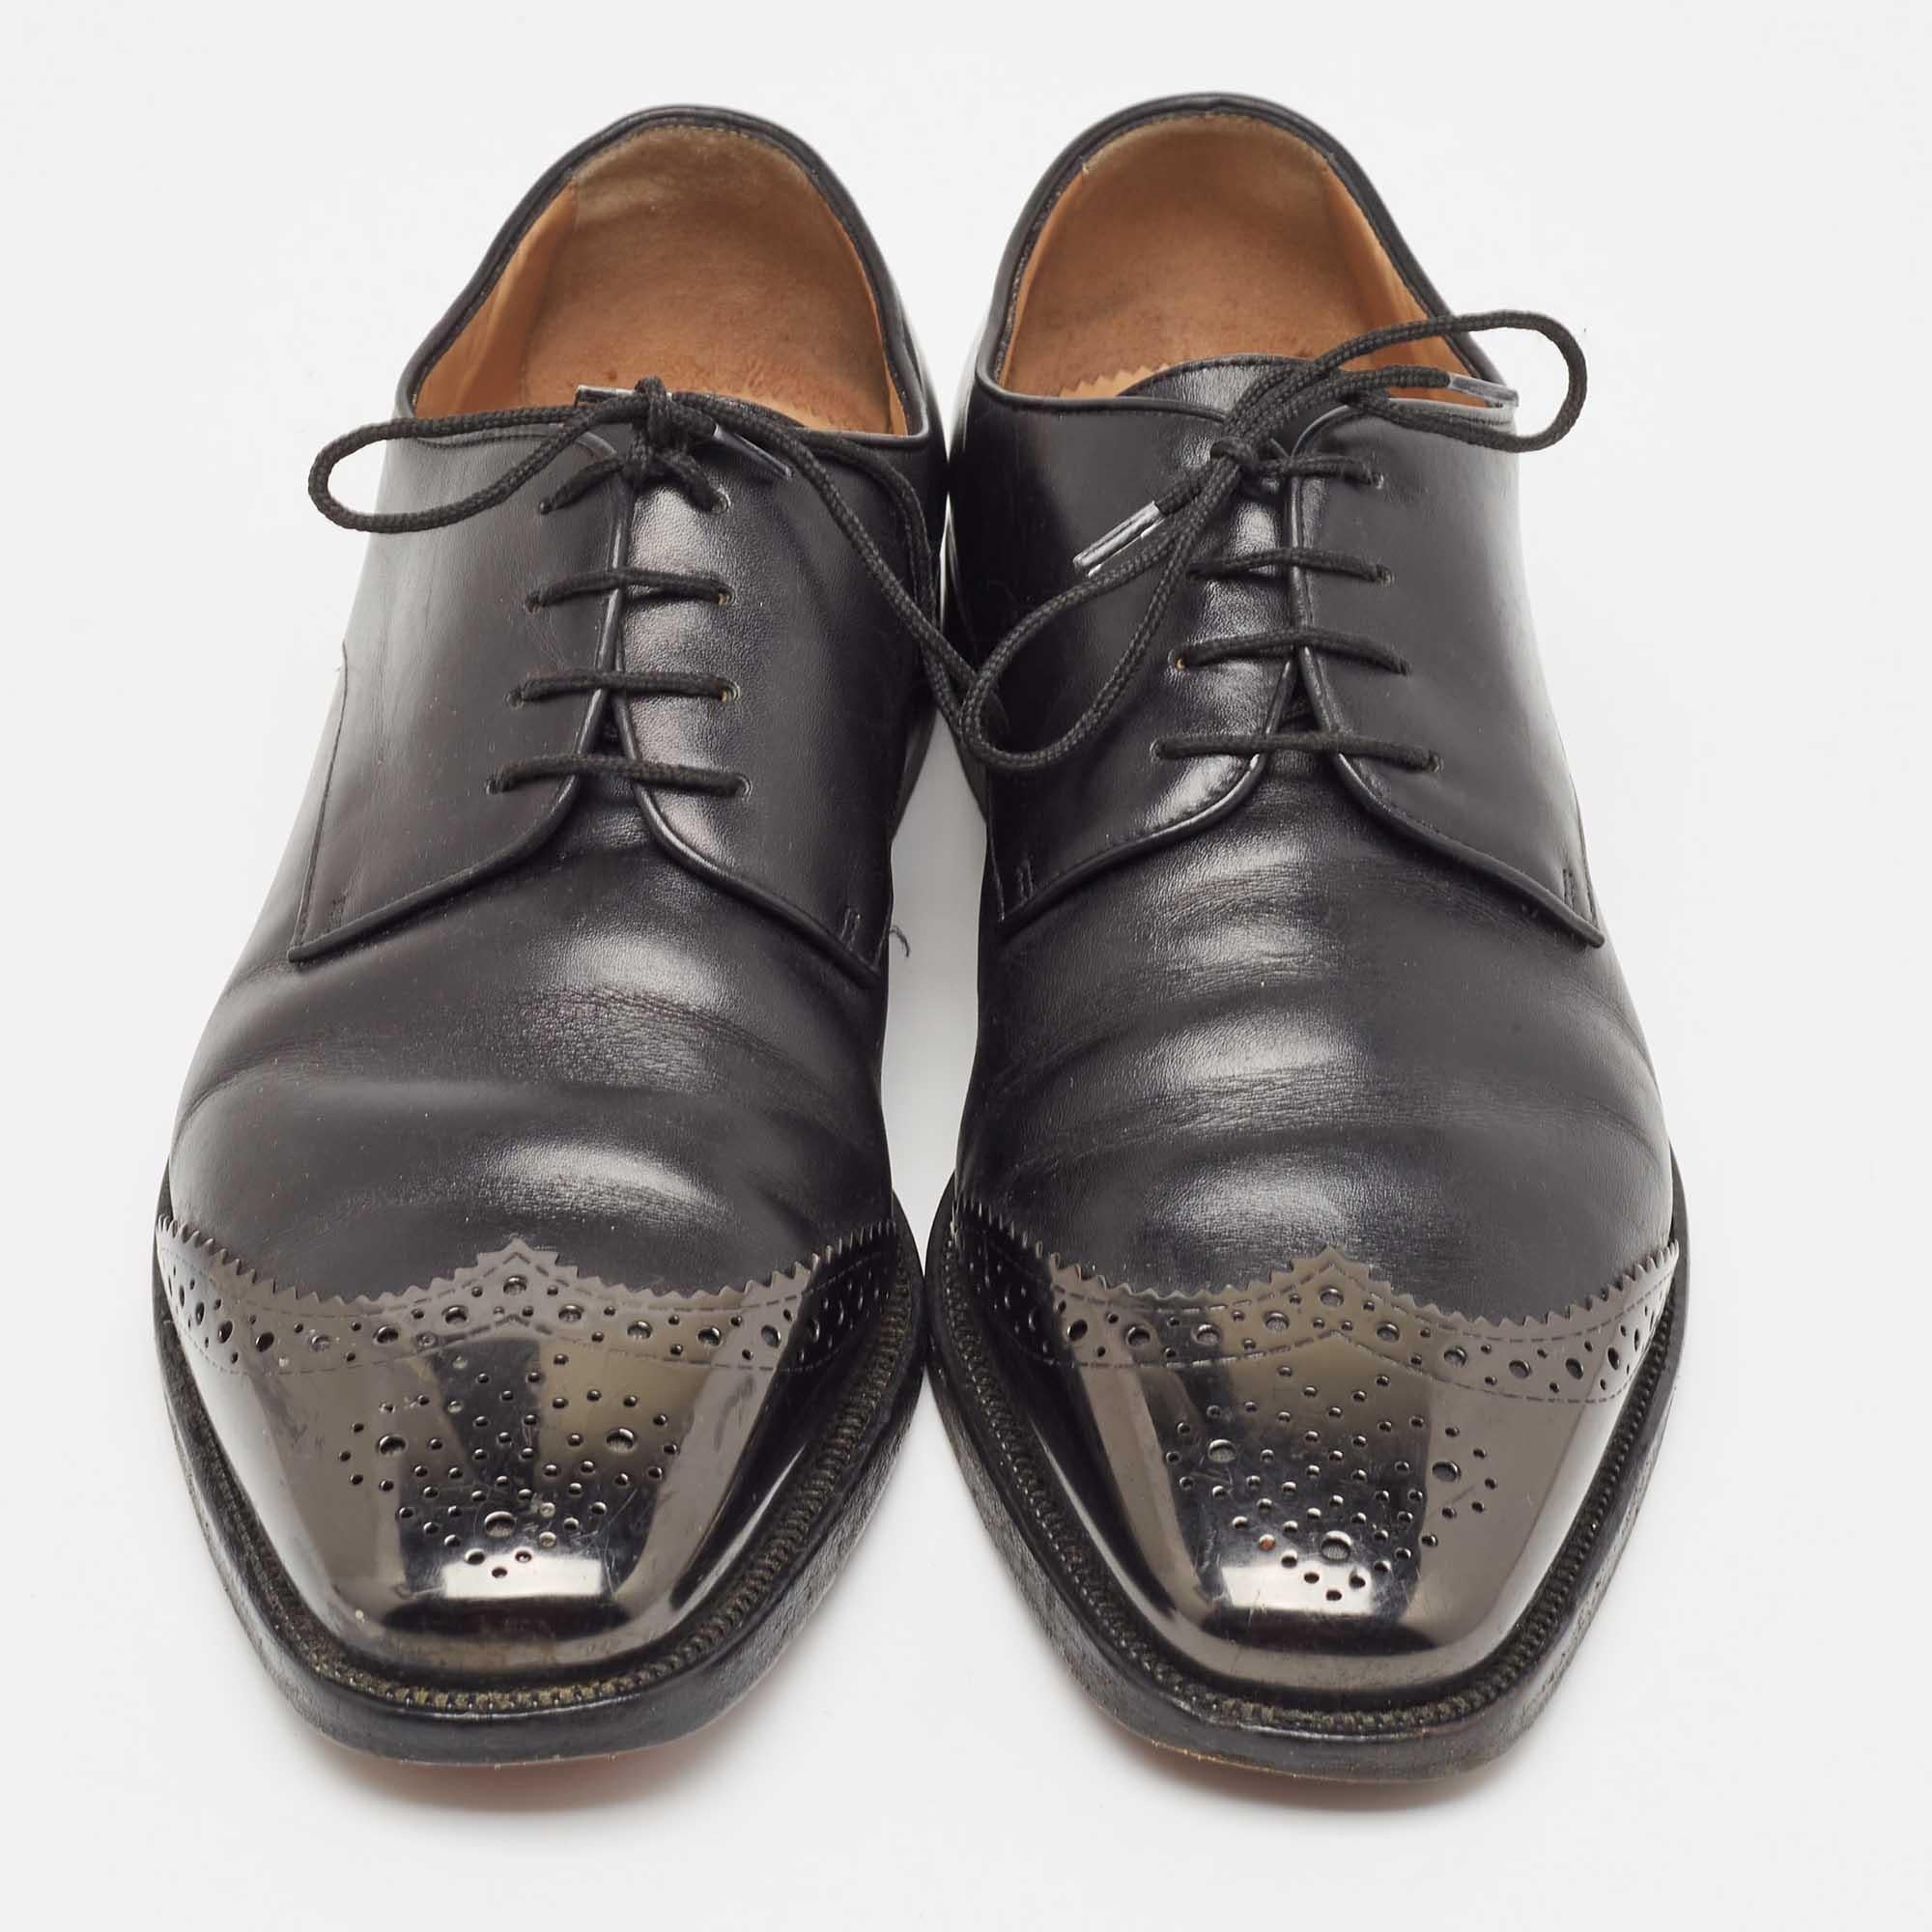 These Christian Louboutin derby shoes aim to deliver a fashionable result. Constructed using leather and secured with laces, these shoes are as durable as they are appealing.

